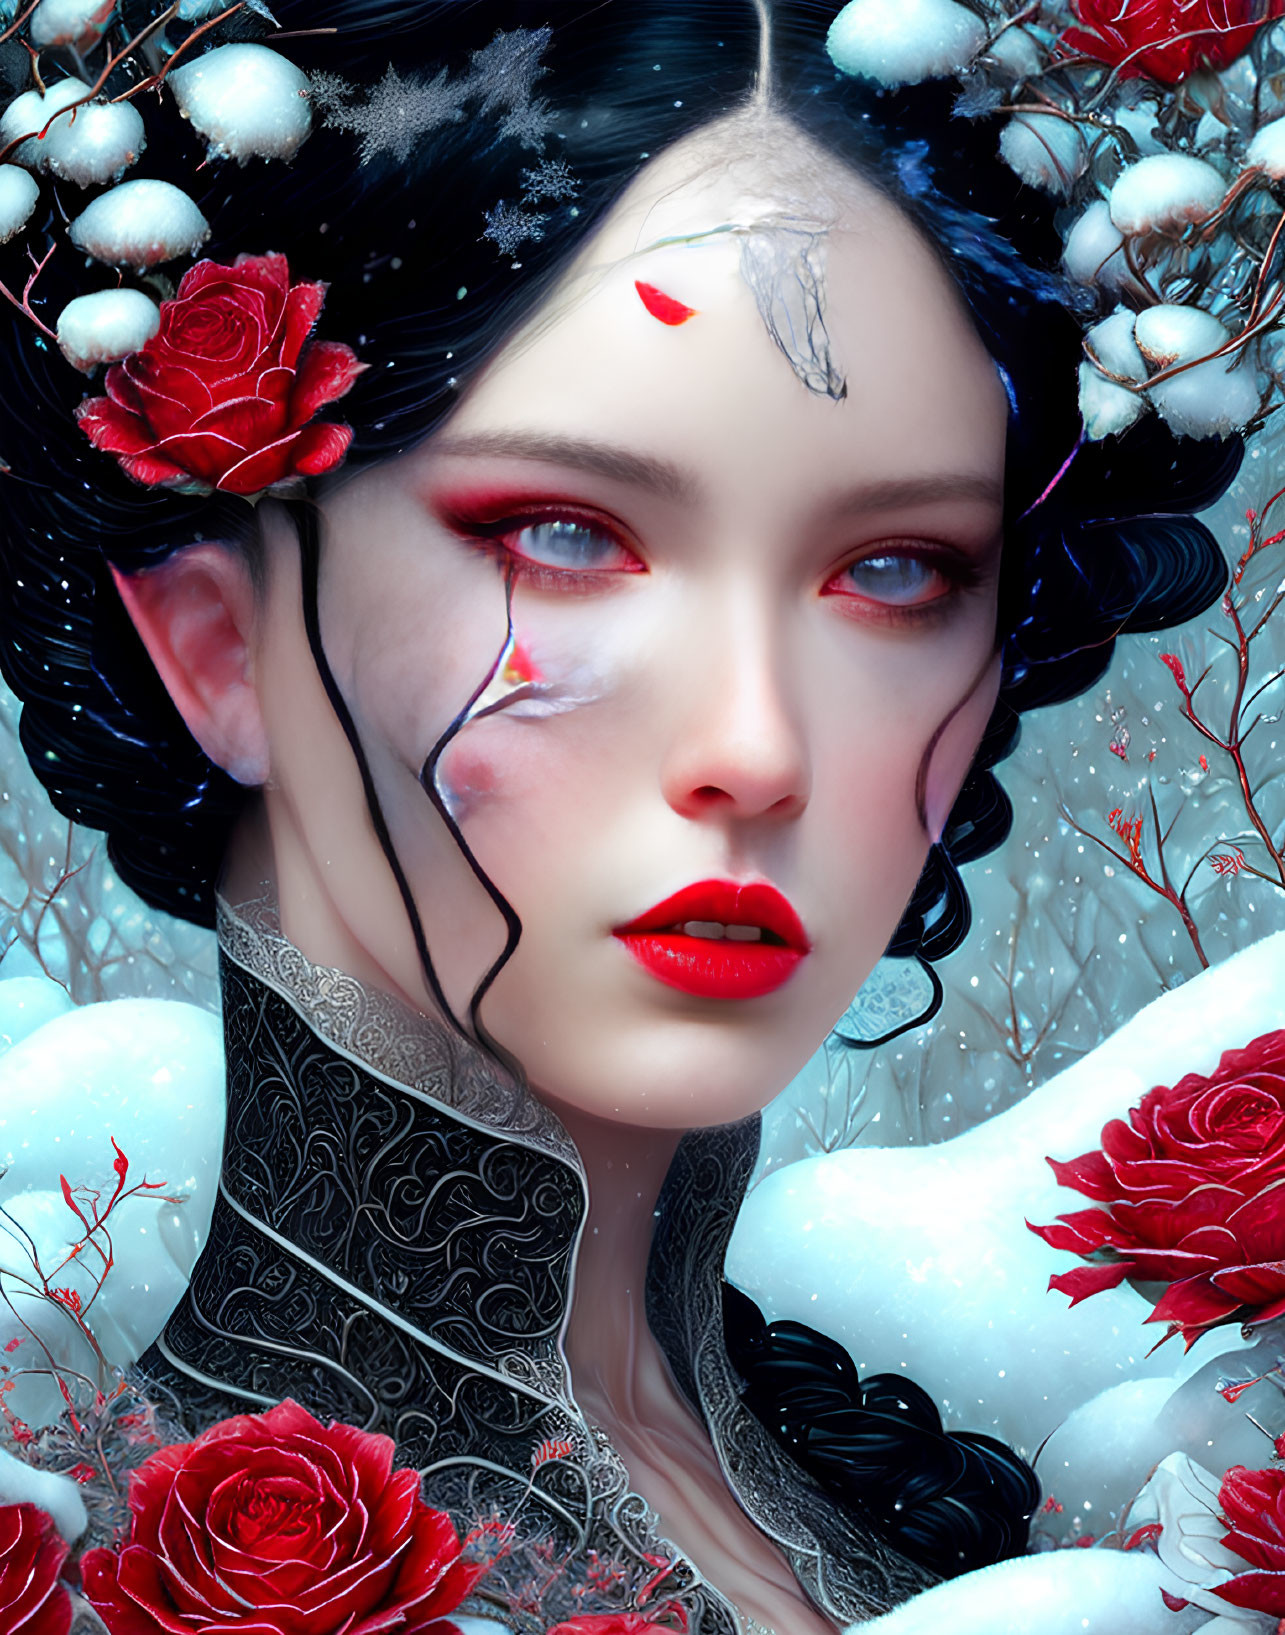 Digital artwork: Pale-skinned woman with red eyes, surrounded by roses and snow